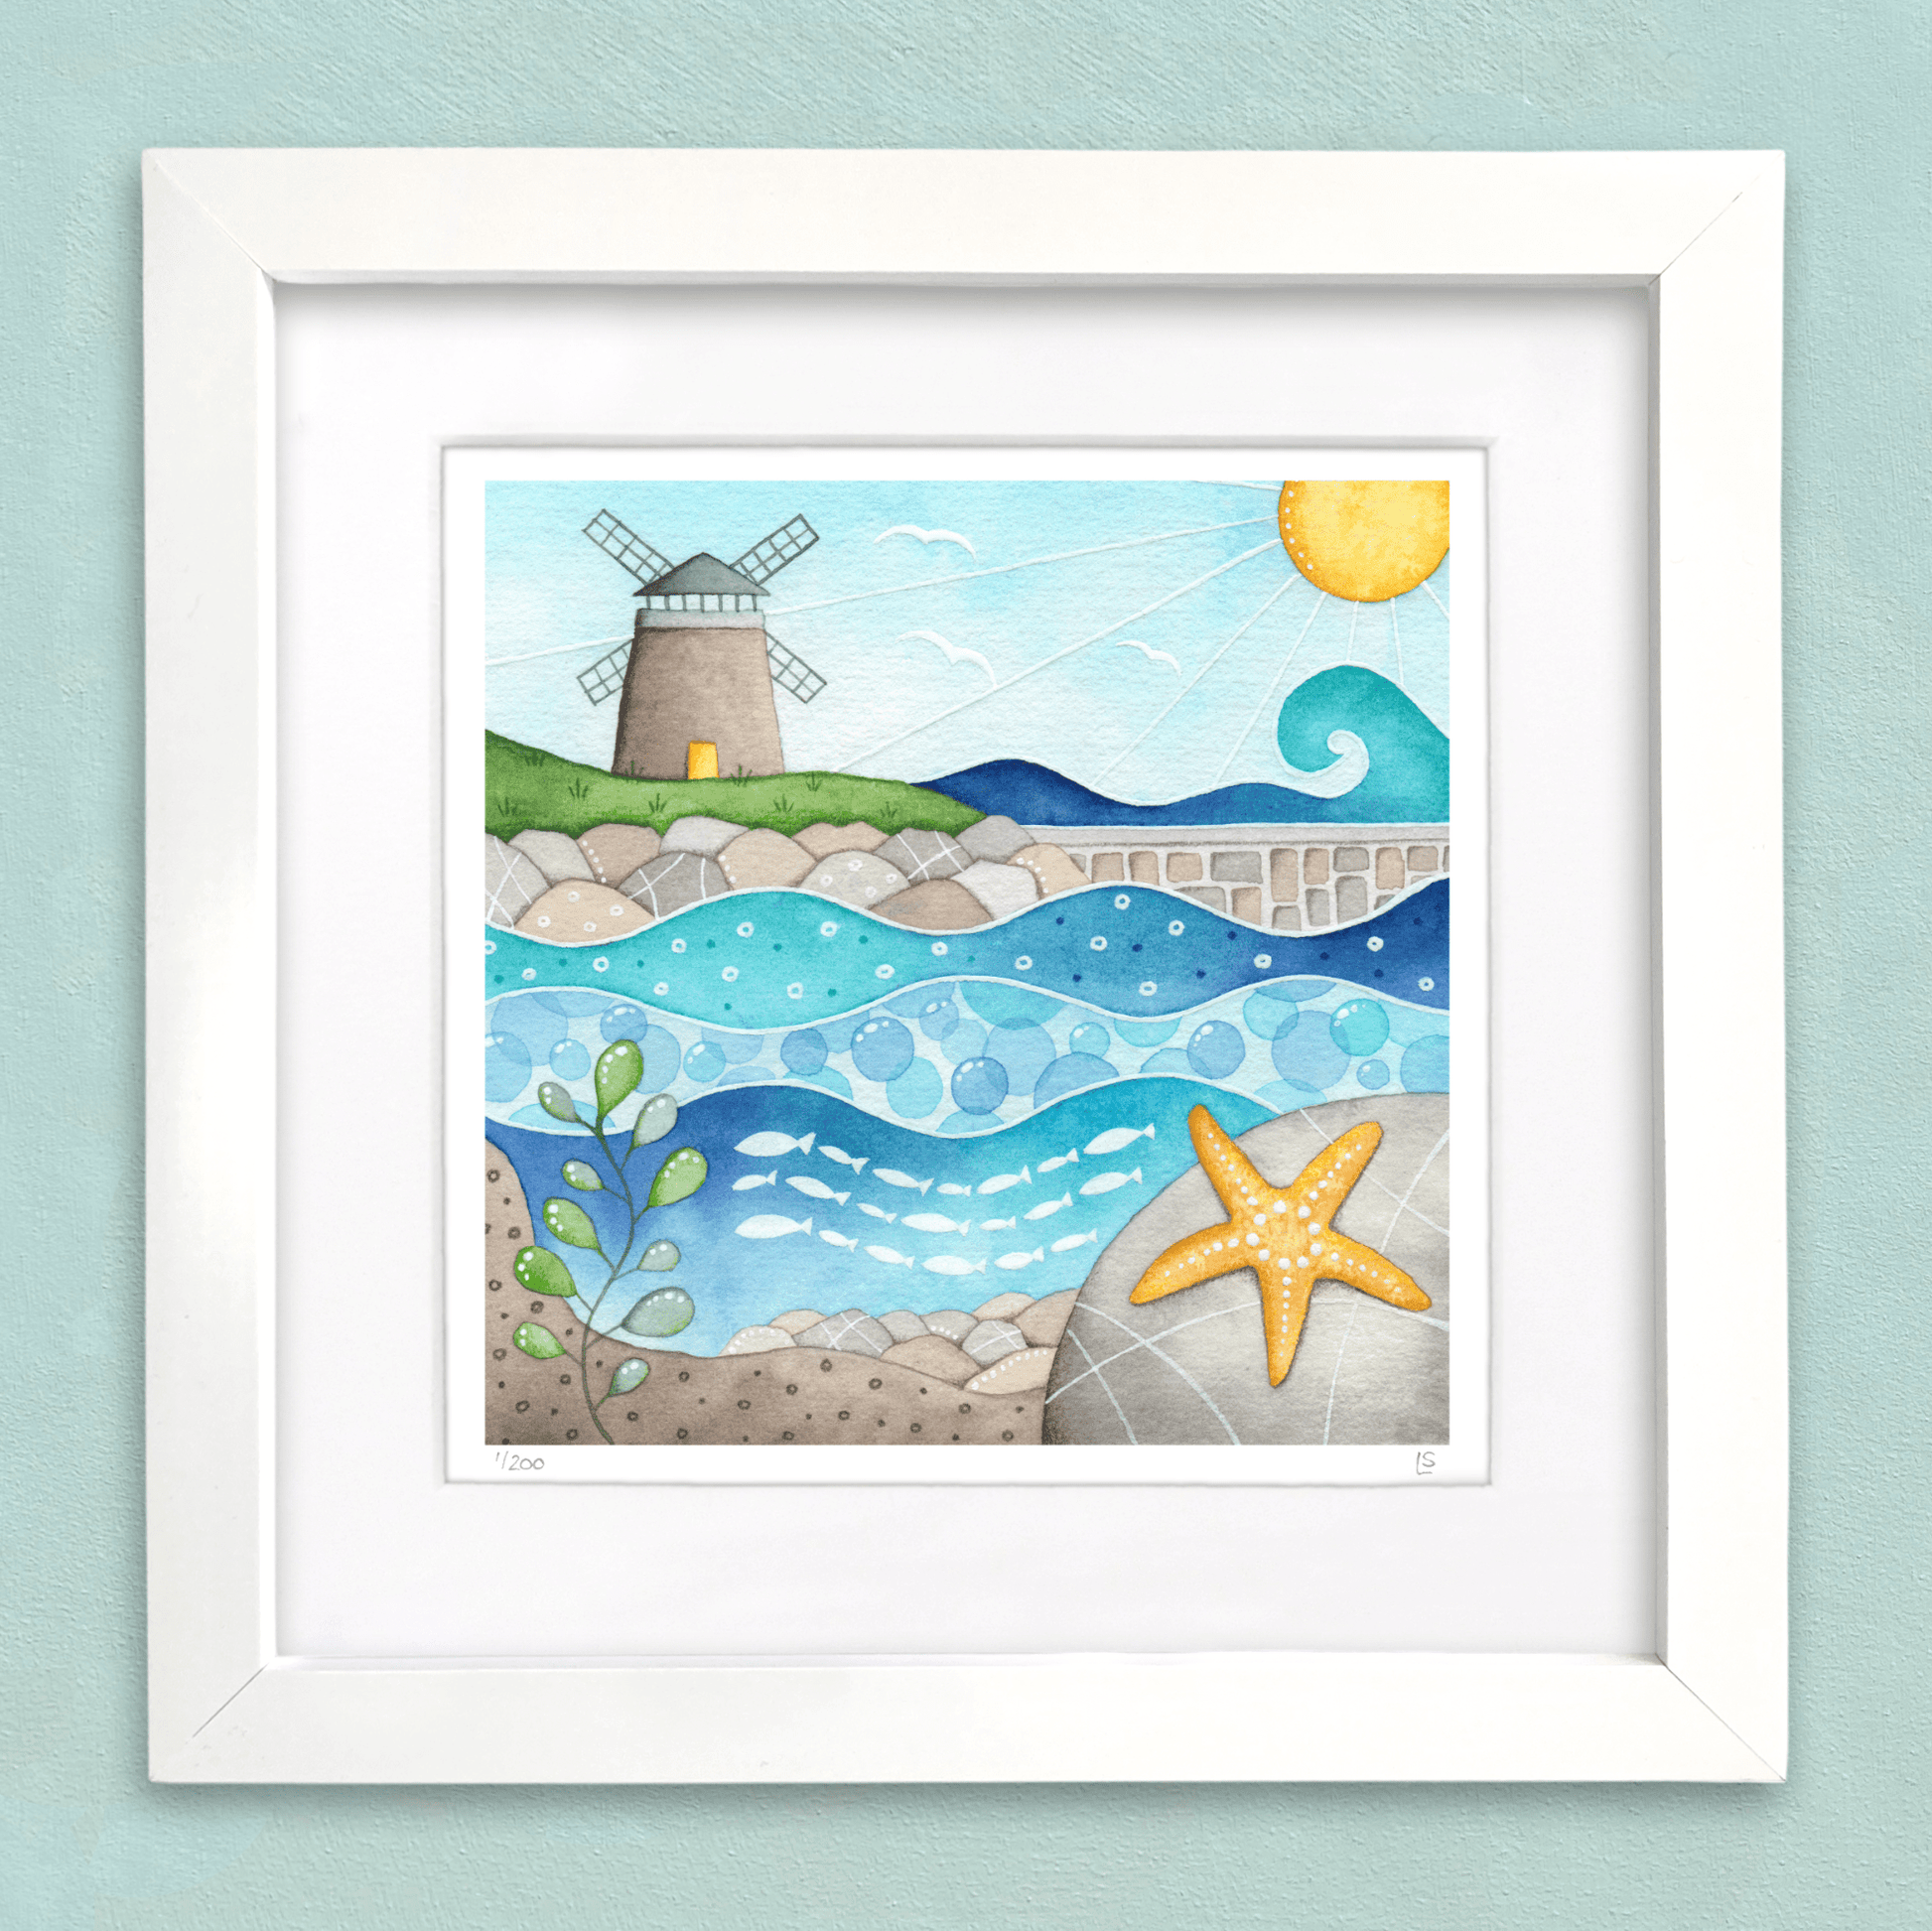 Windmill & Bathing Pool Print - St Monans Seaside Watercolour Painting - Limited Edition Signed Art - East Neuk Beach Crafts